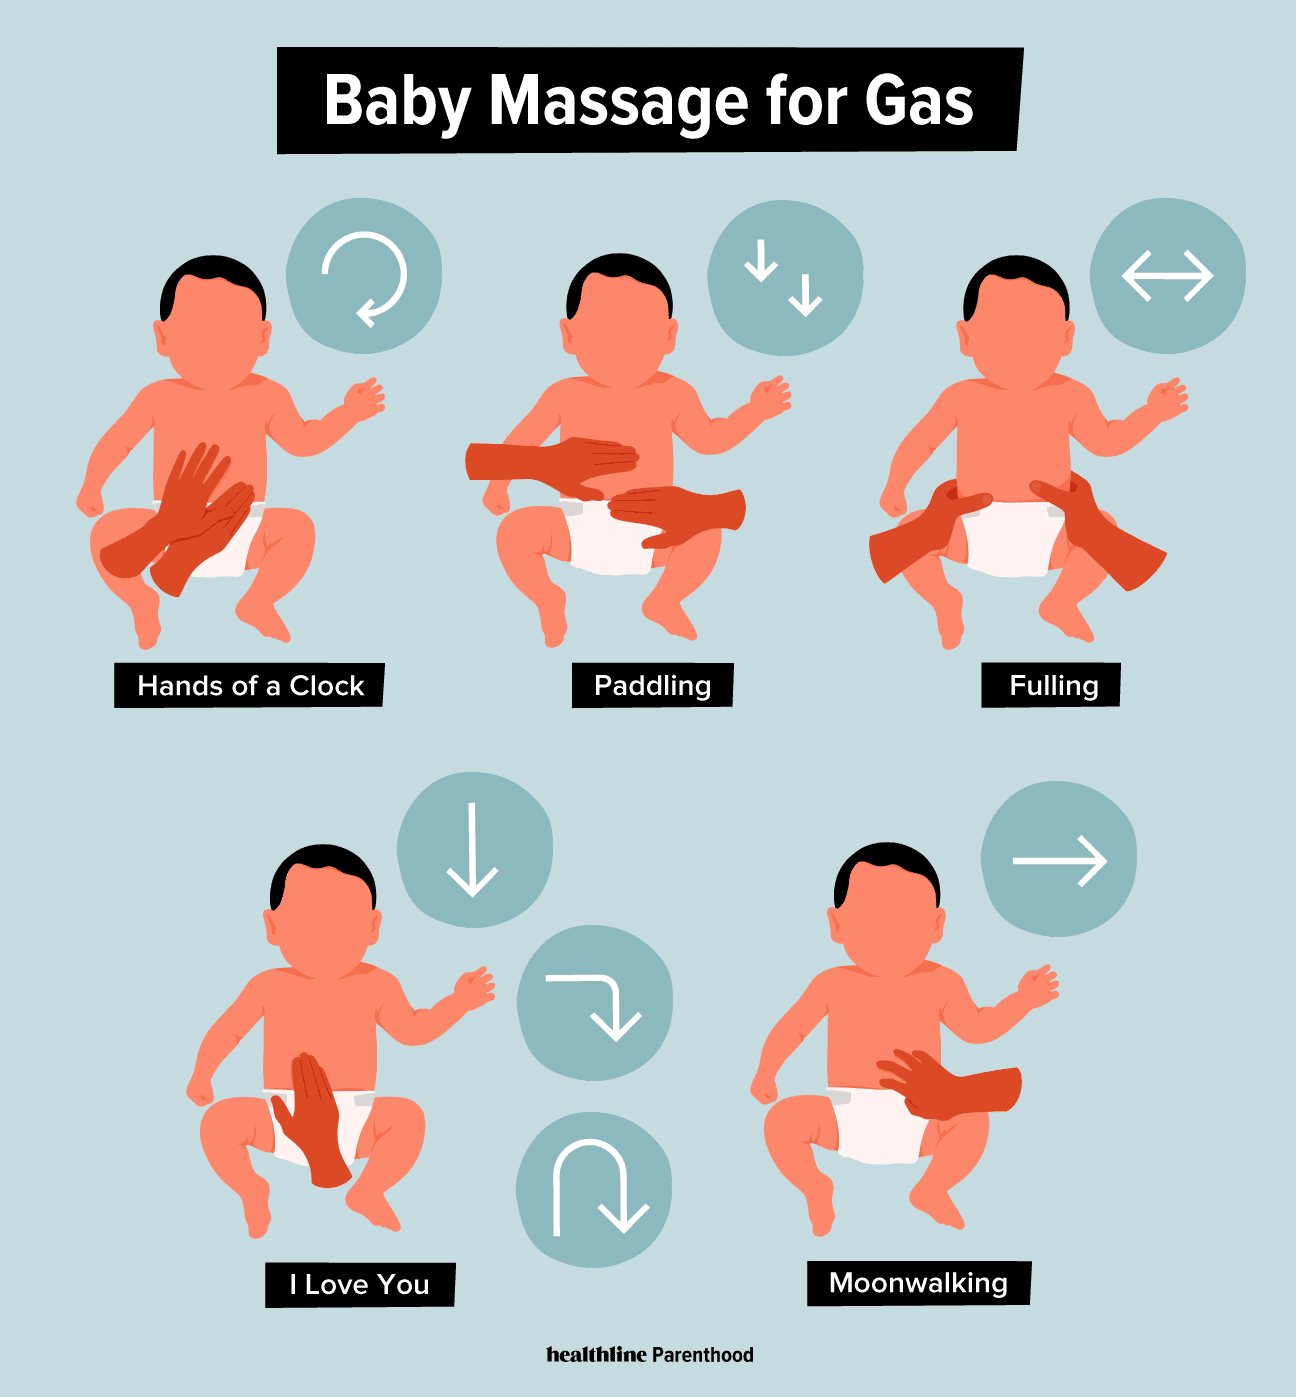 Baby Massage for Gas